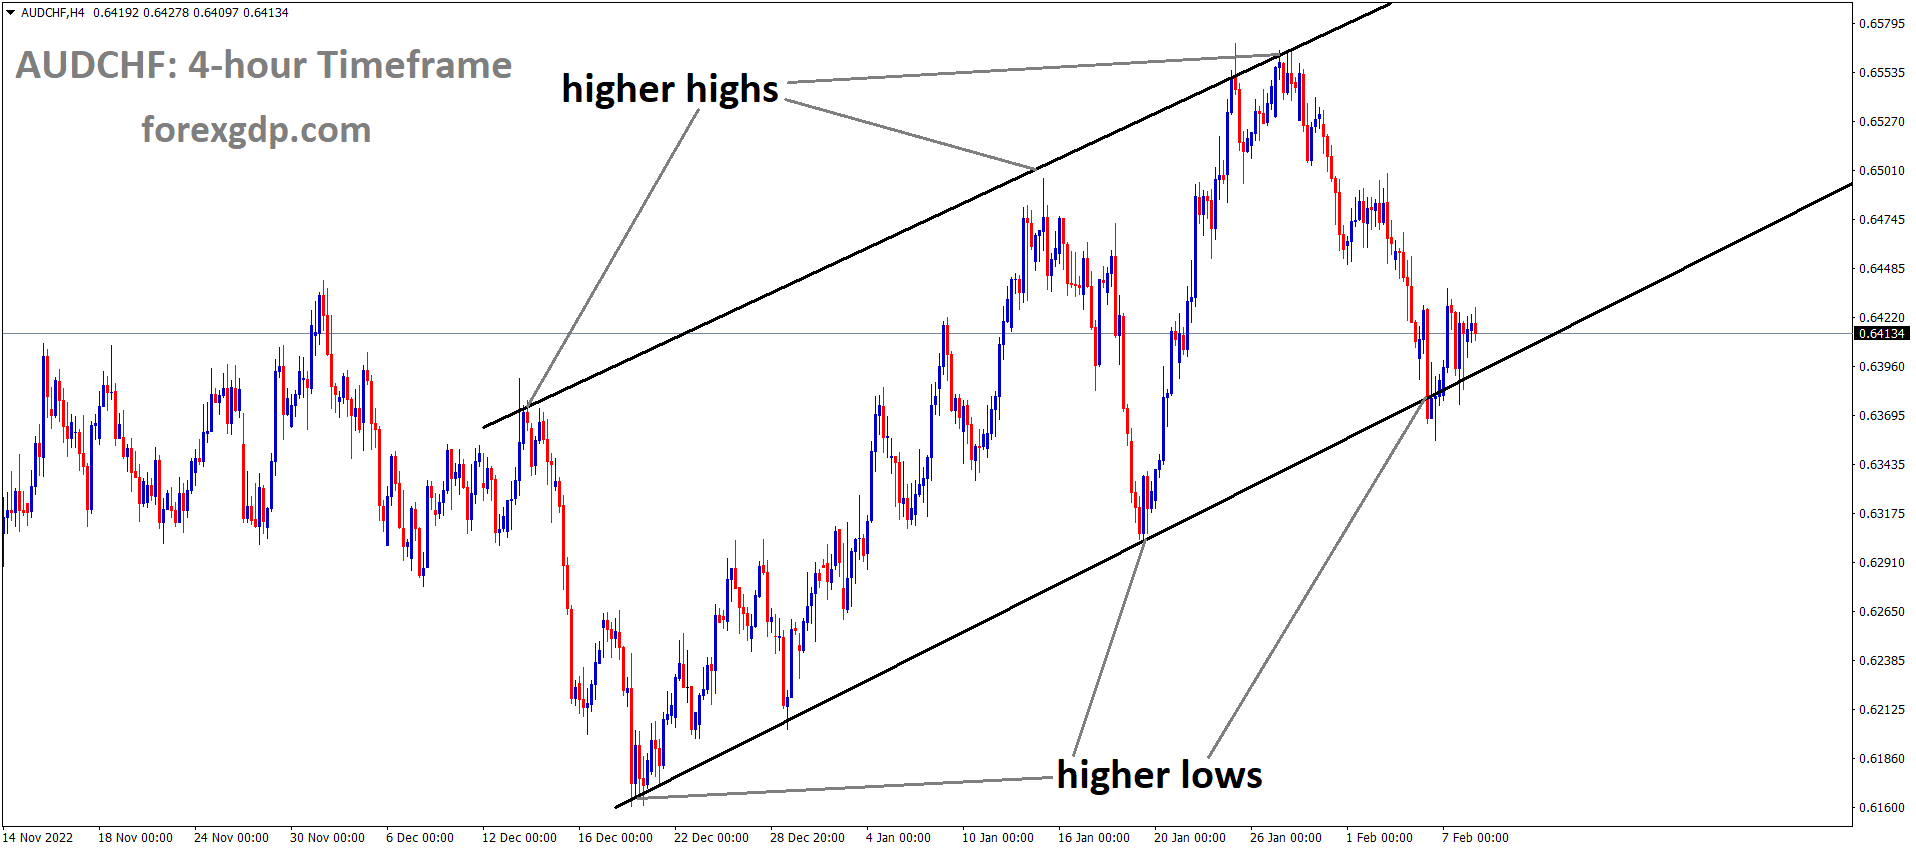 AUDCHF is moving in an Ascending channel and the market has reached the higher low area of the channel